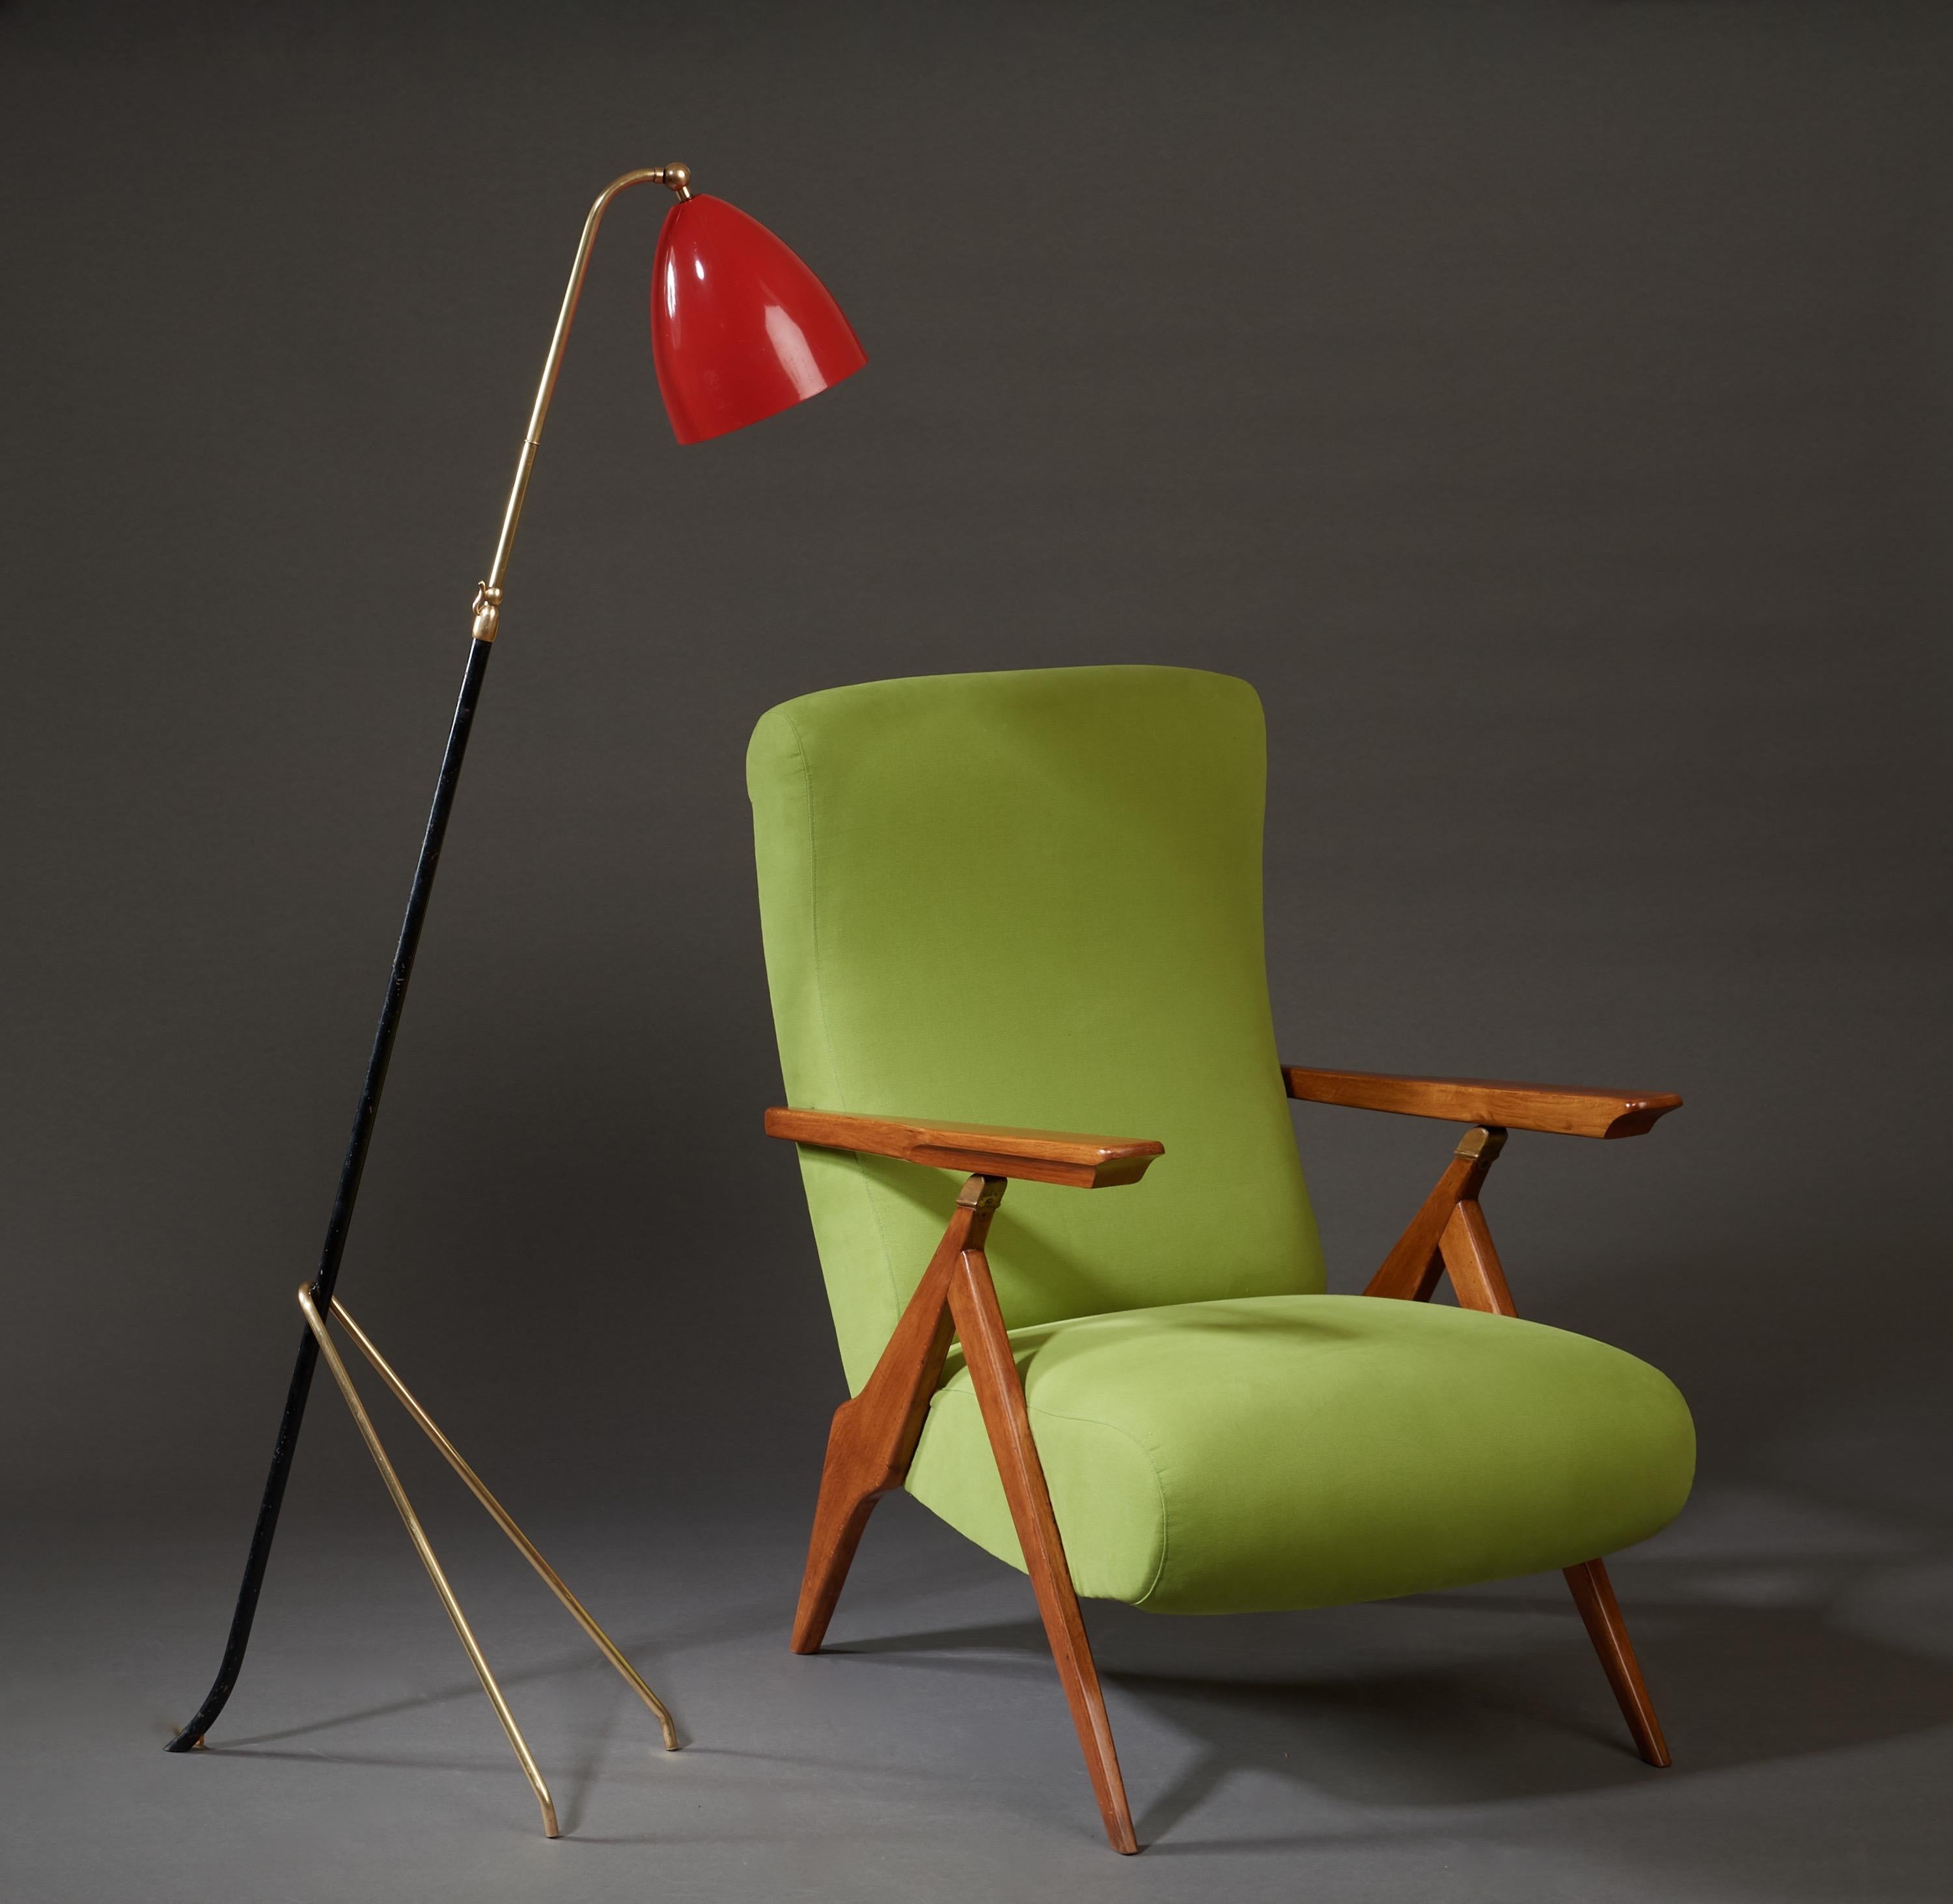 Angelo Lelii (1911-1979)

An elegant, adjustable floor lamp by Angelo Lelii (sometimes spelled Angelo Lelli), for his pioneering lighting firm Arredoluce. A graceful tripartite base curves two polished brass forelegs around a black-lacquered iron